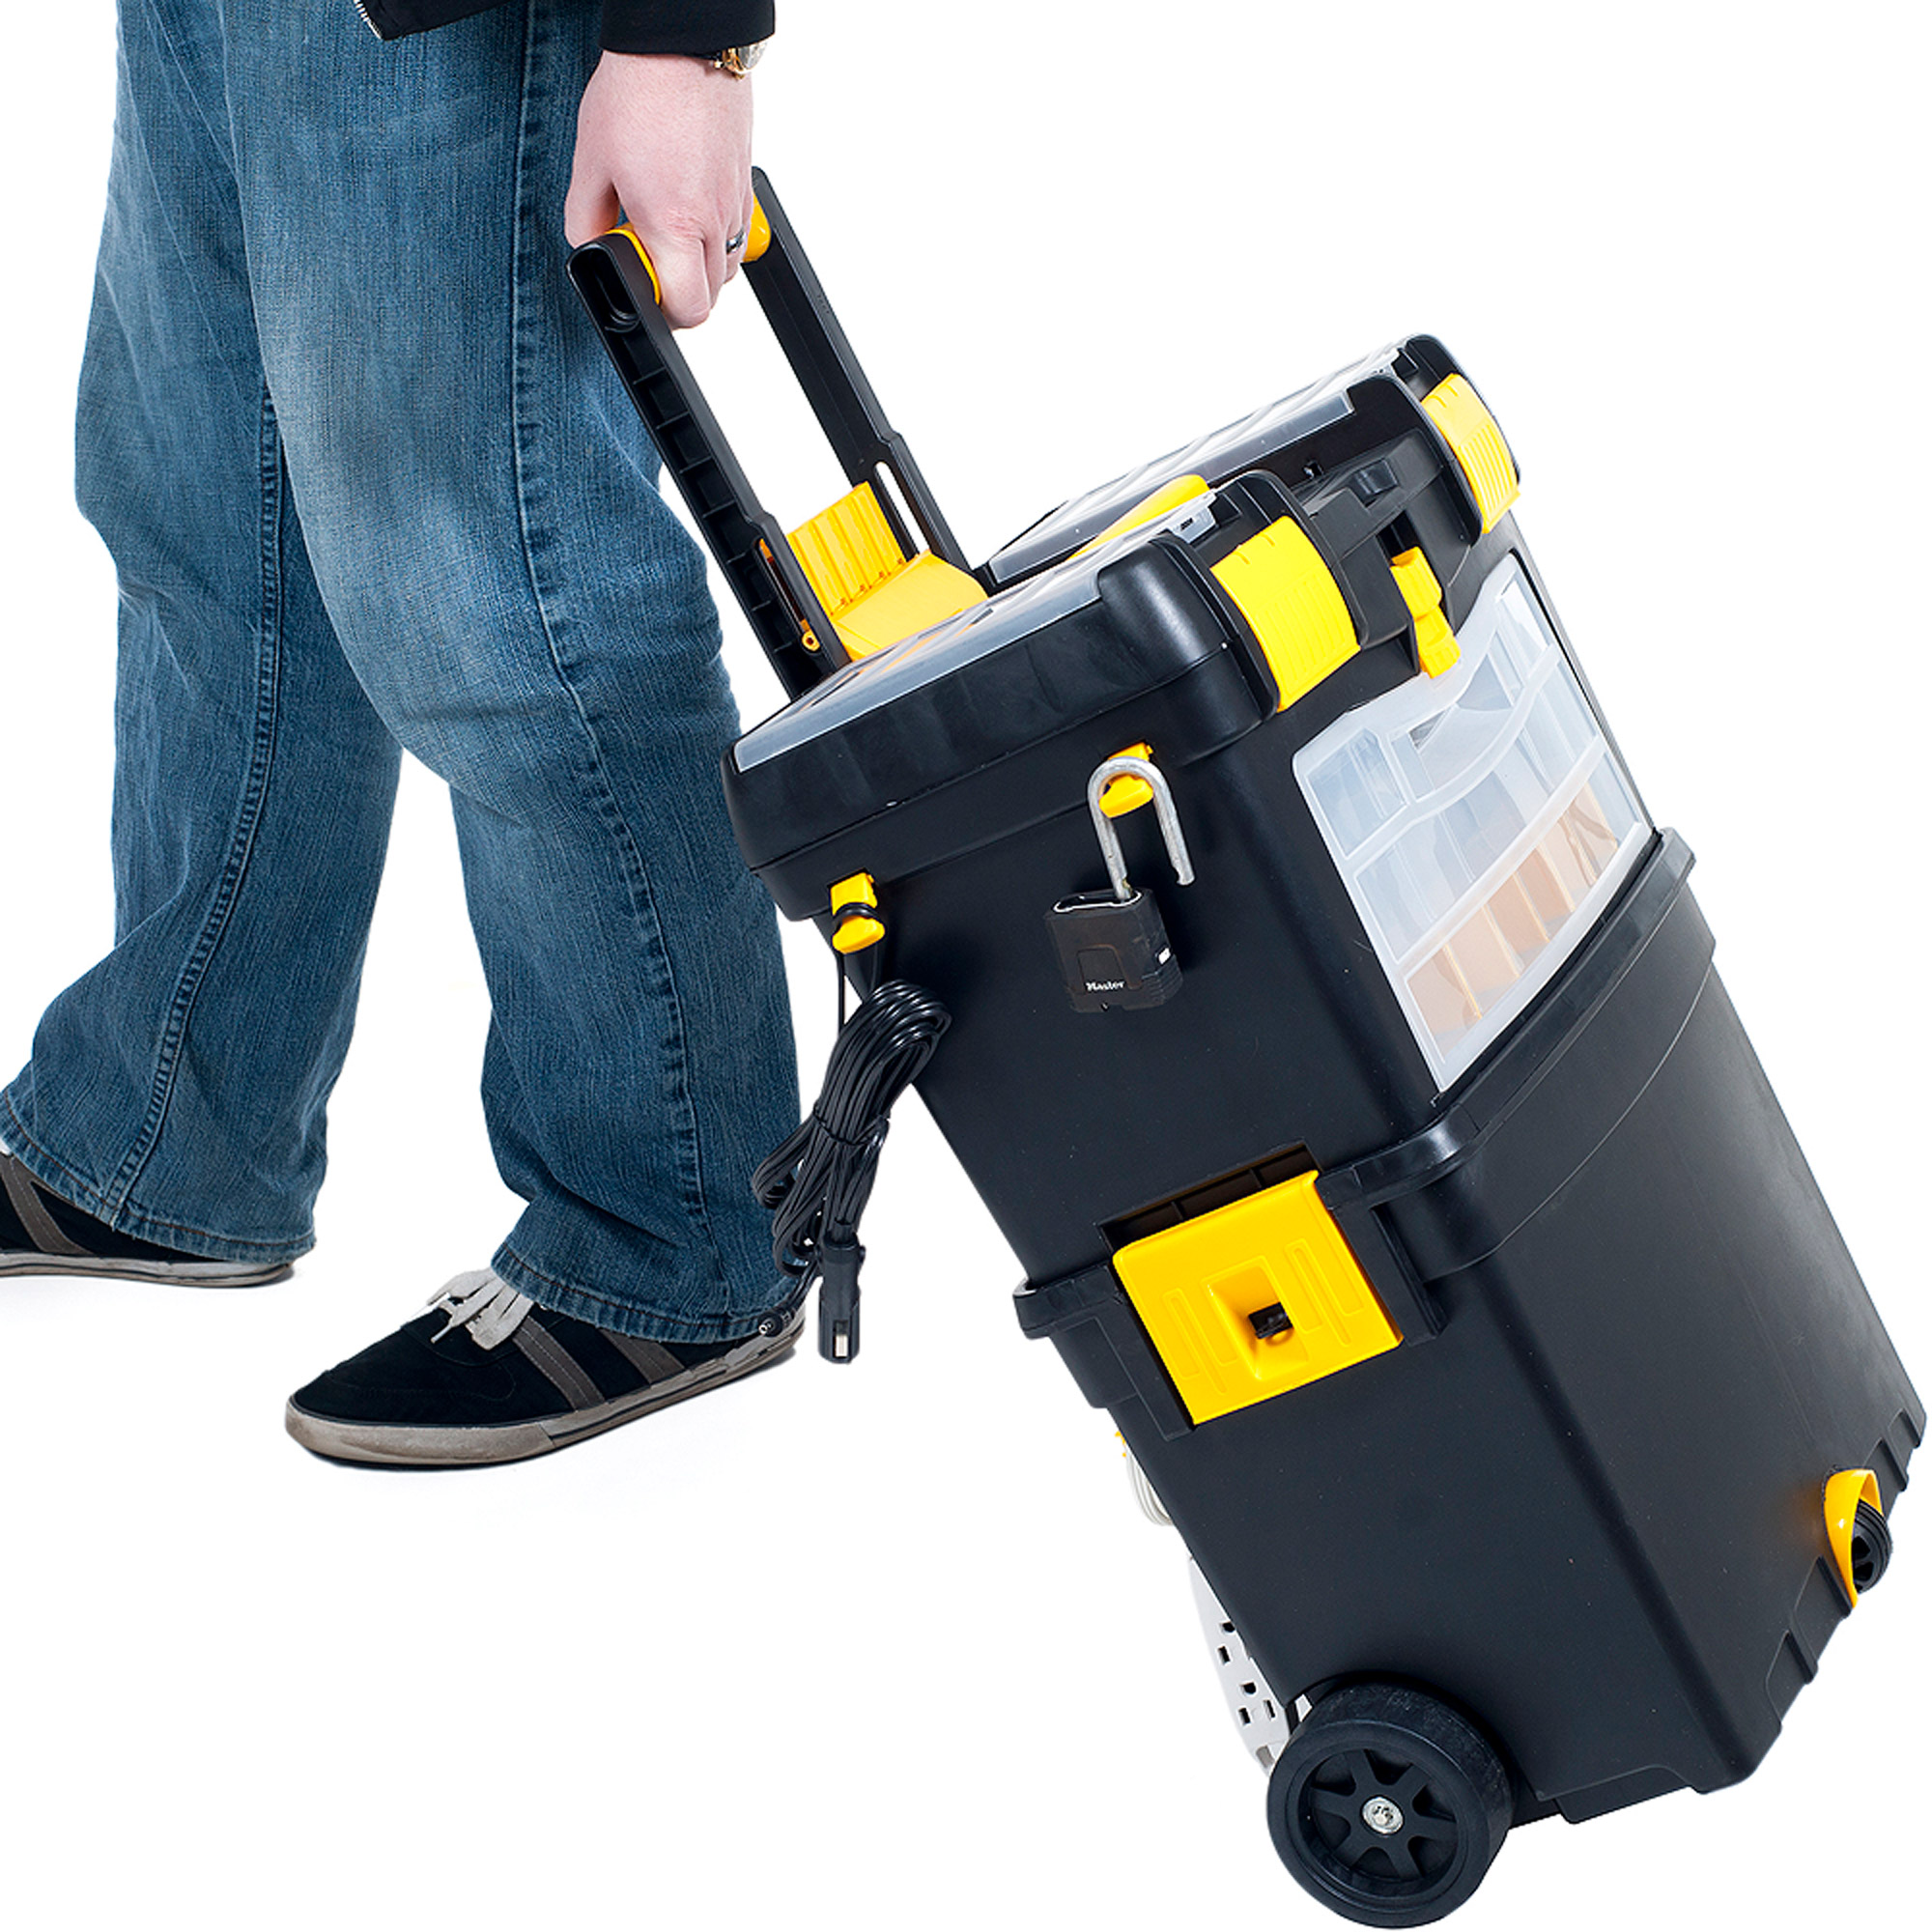 Stalwart Portable Toolbox with Wheels, Comfort Grip, and Drawers (Black) - image 2 of 6